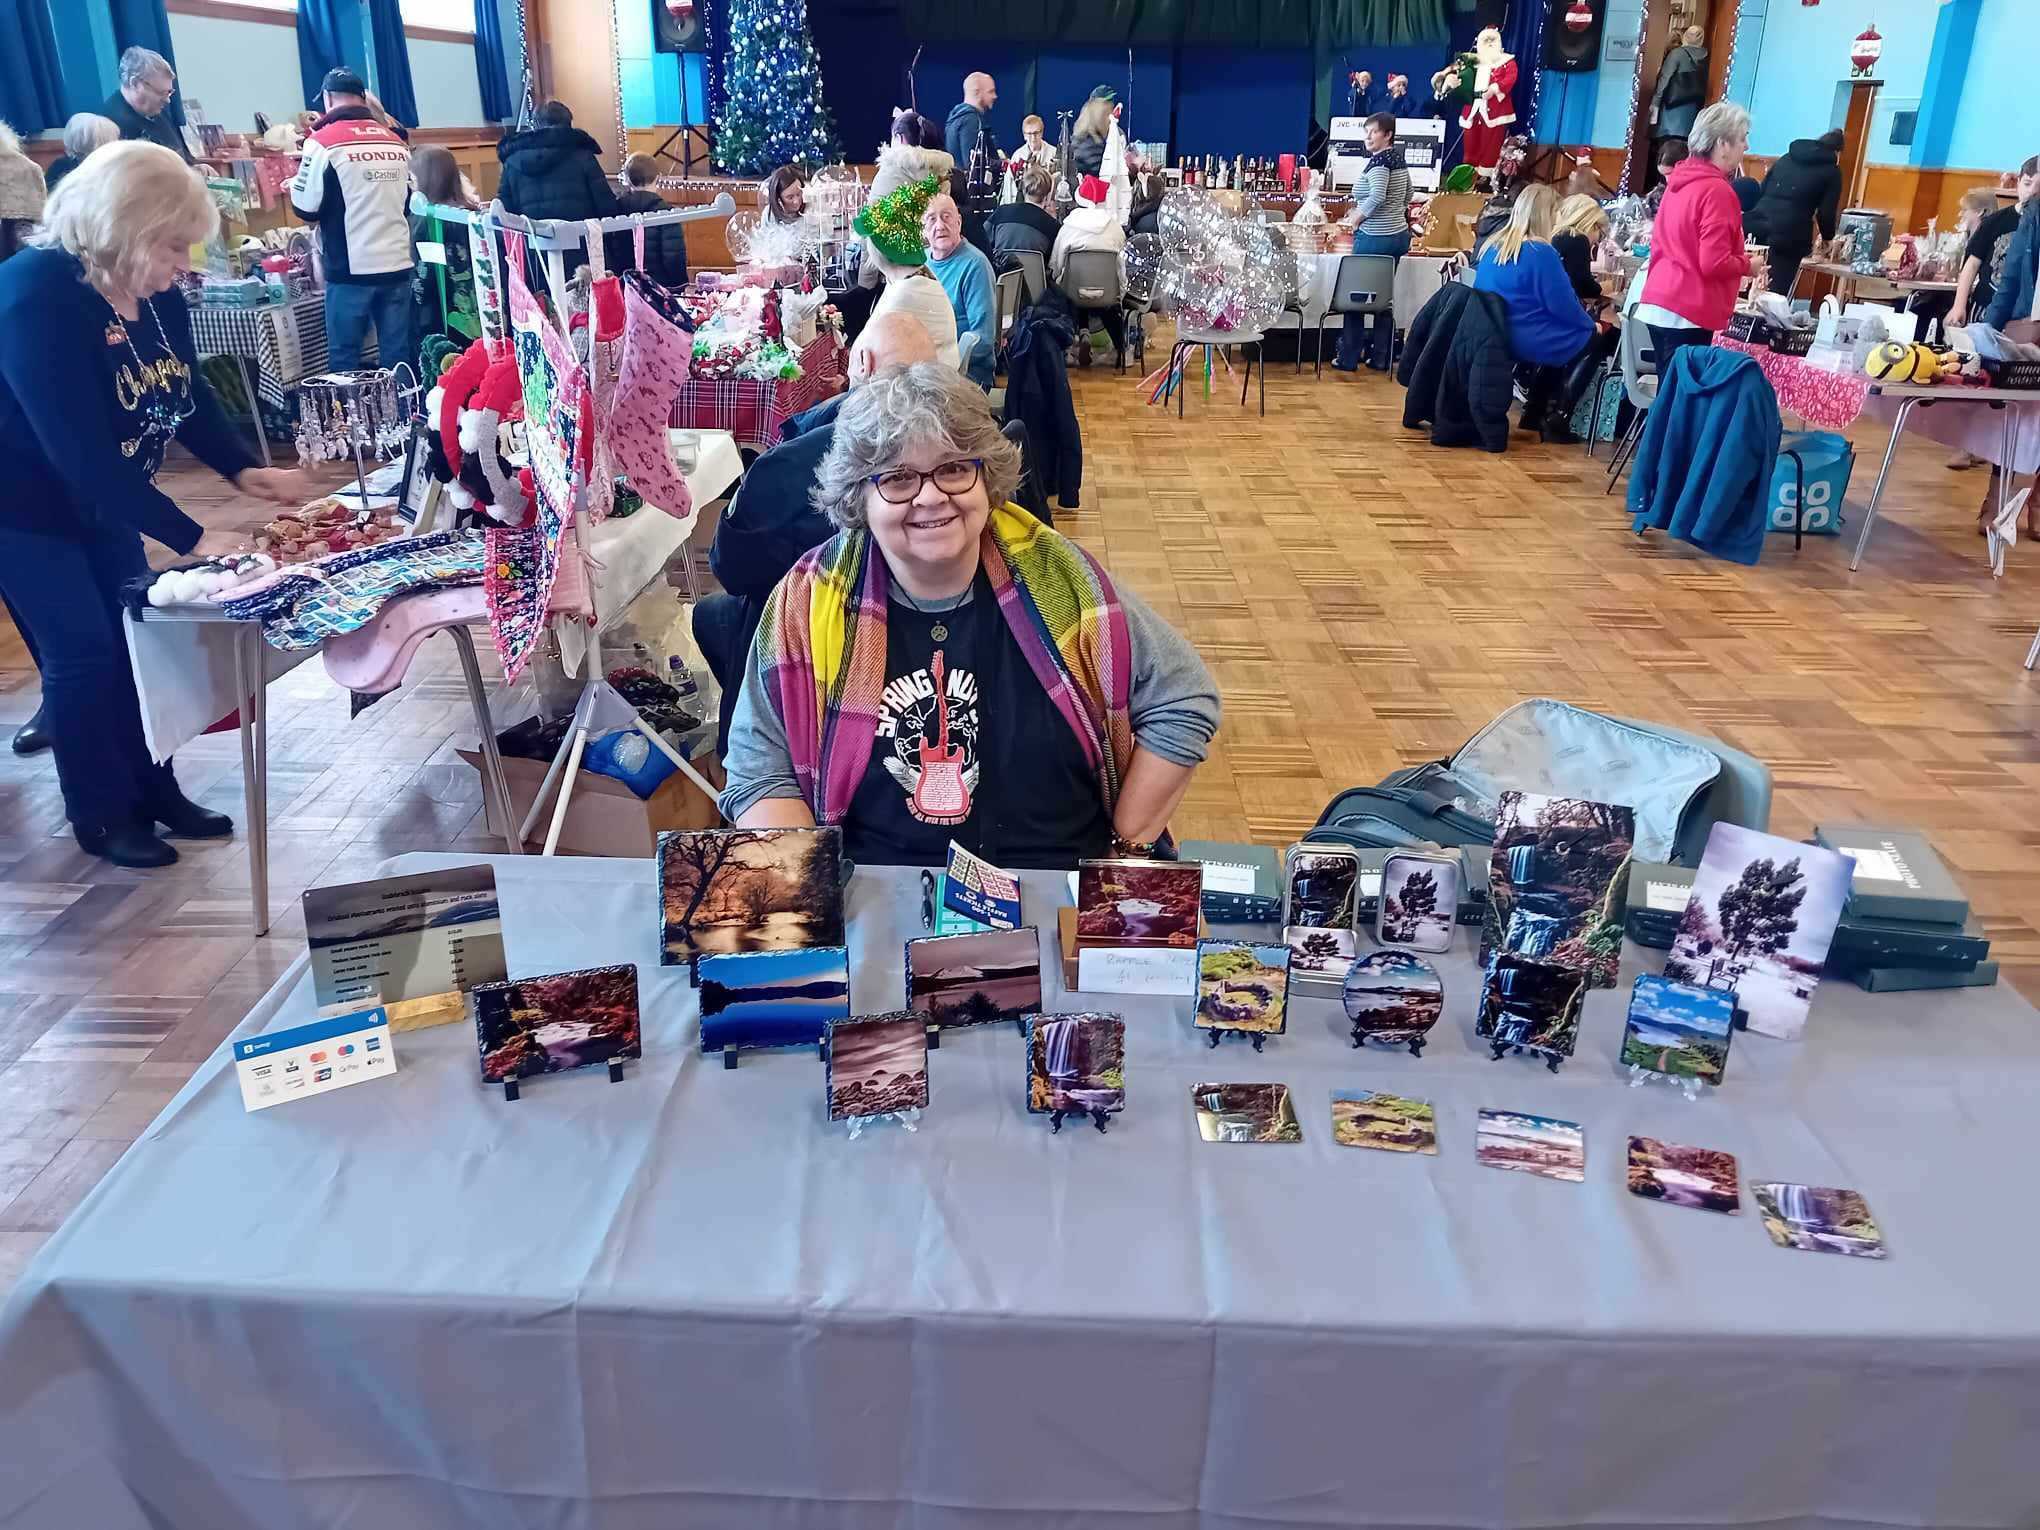 Dalmellingtons Christmas fayre took place at the towns community centre 